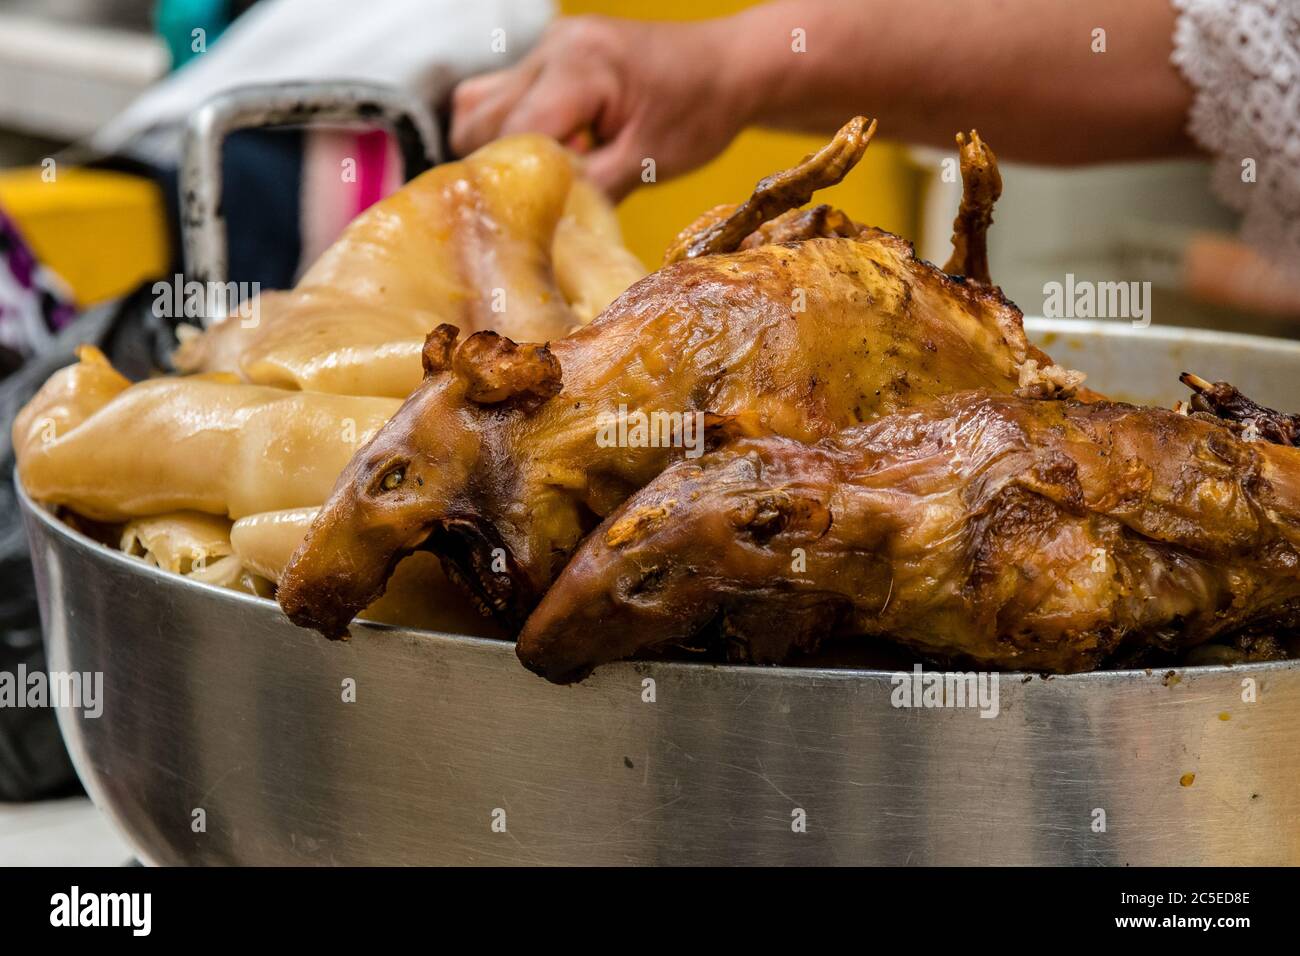 Roasted guinea pigs in a street food restaurant Stock Photo